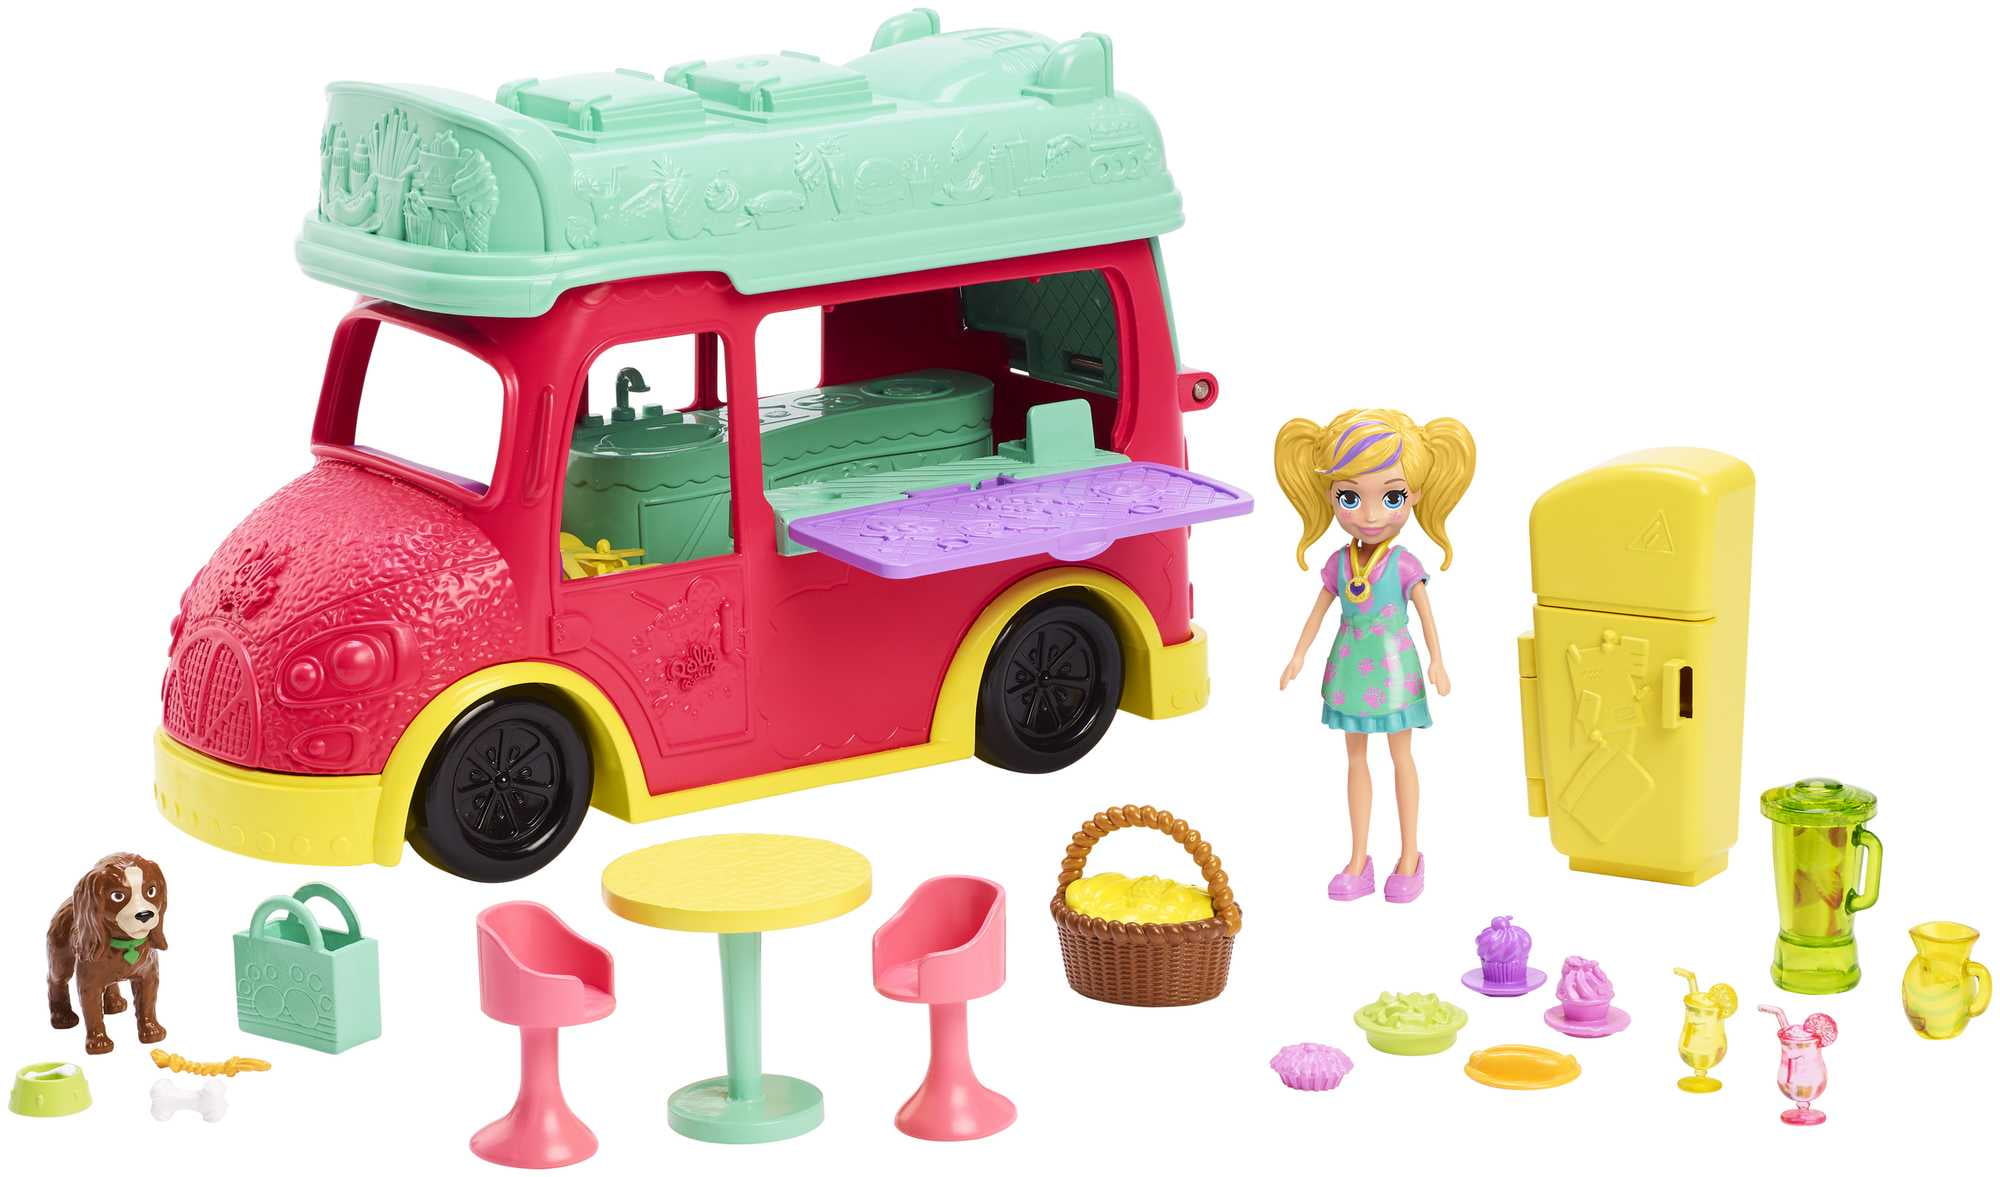 Polly Pocket coffret multifacettes smoothie, Figurines